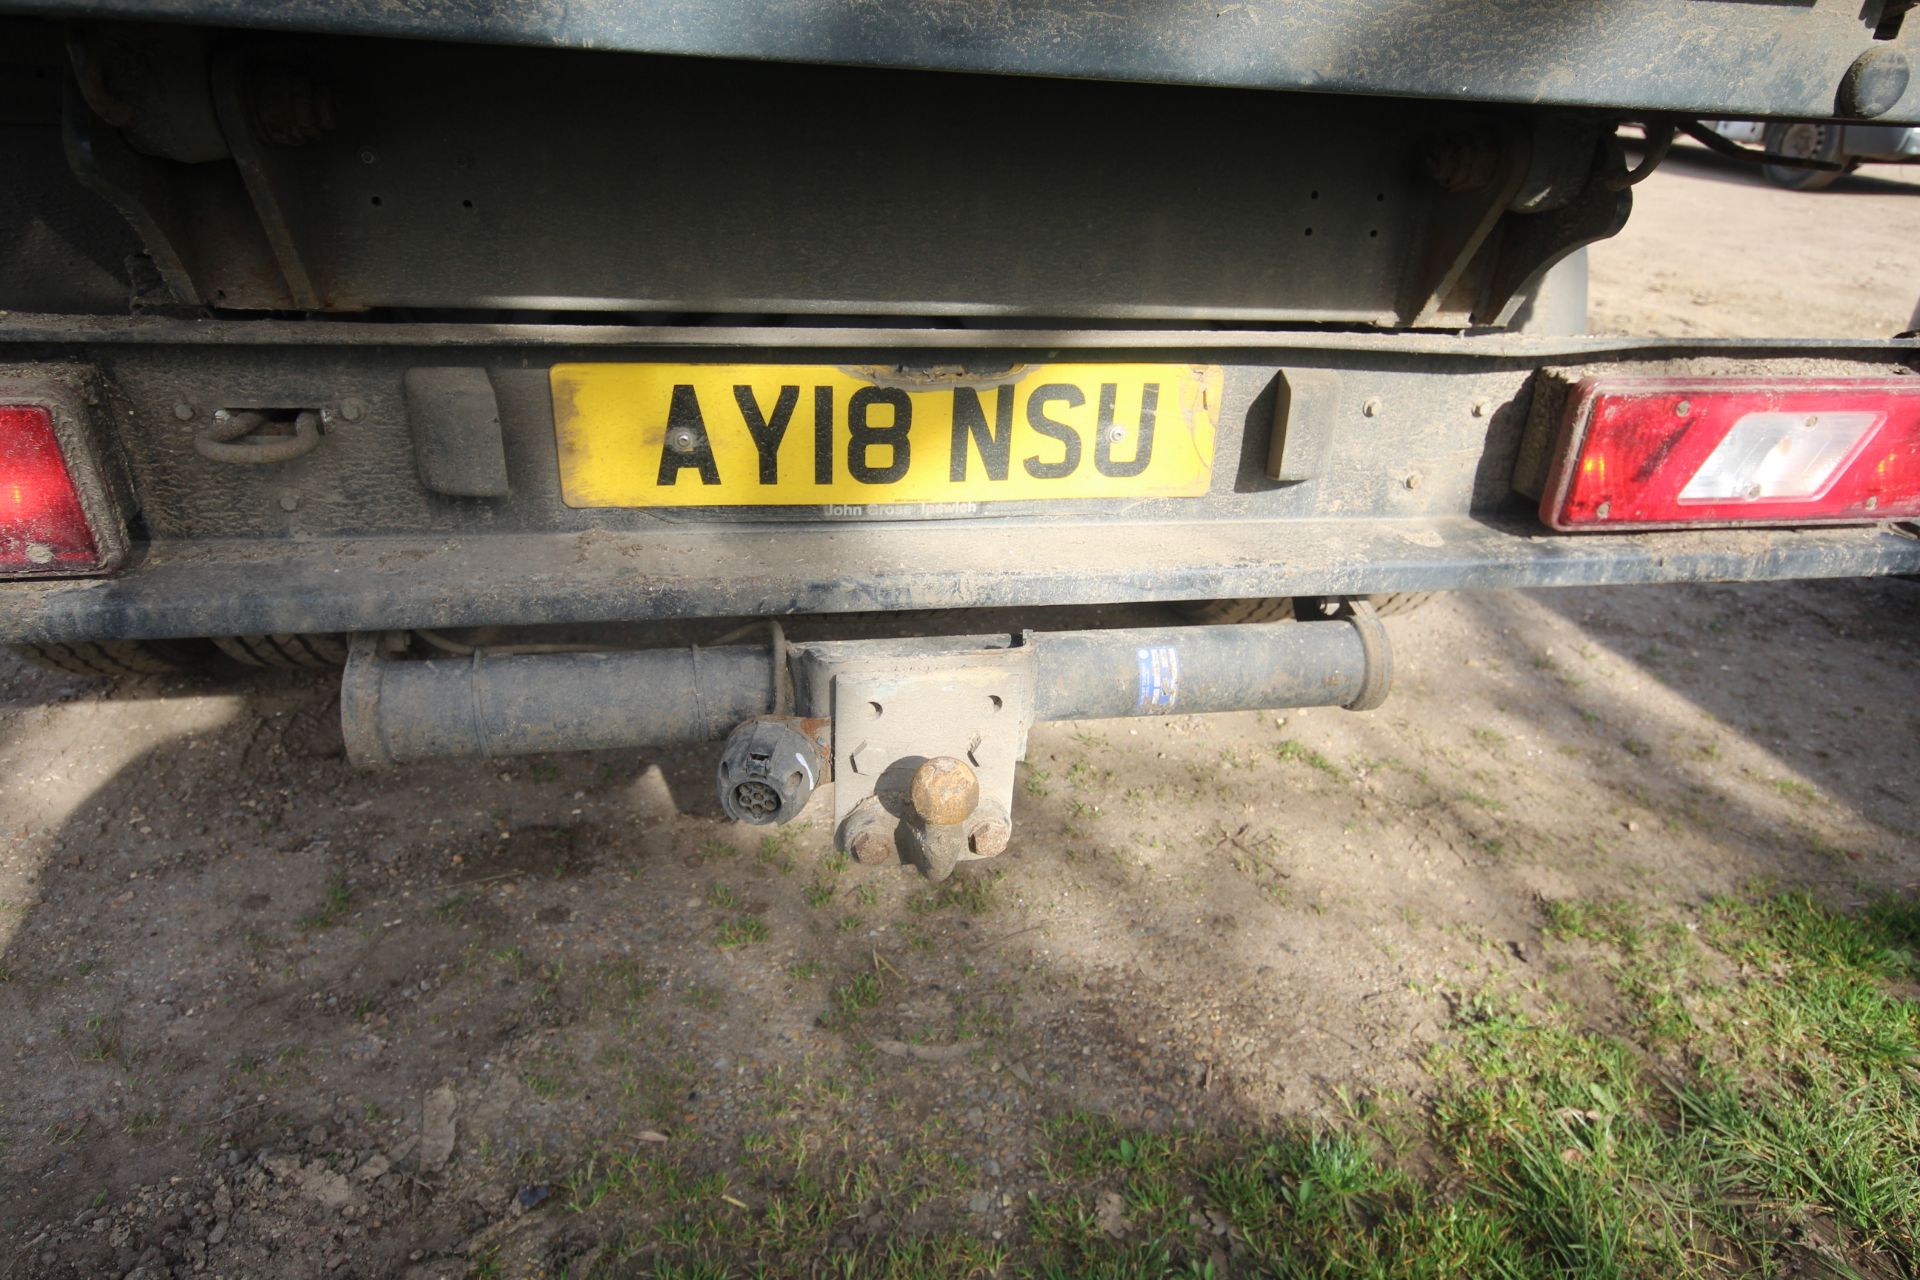 Ford Transit 350 2L diesel manual drop-side tipper. Registration AY18 NSU. Date of first - Image 22 of 64